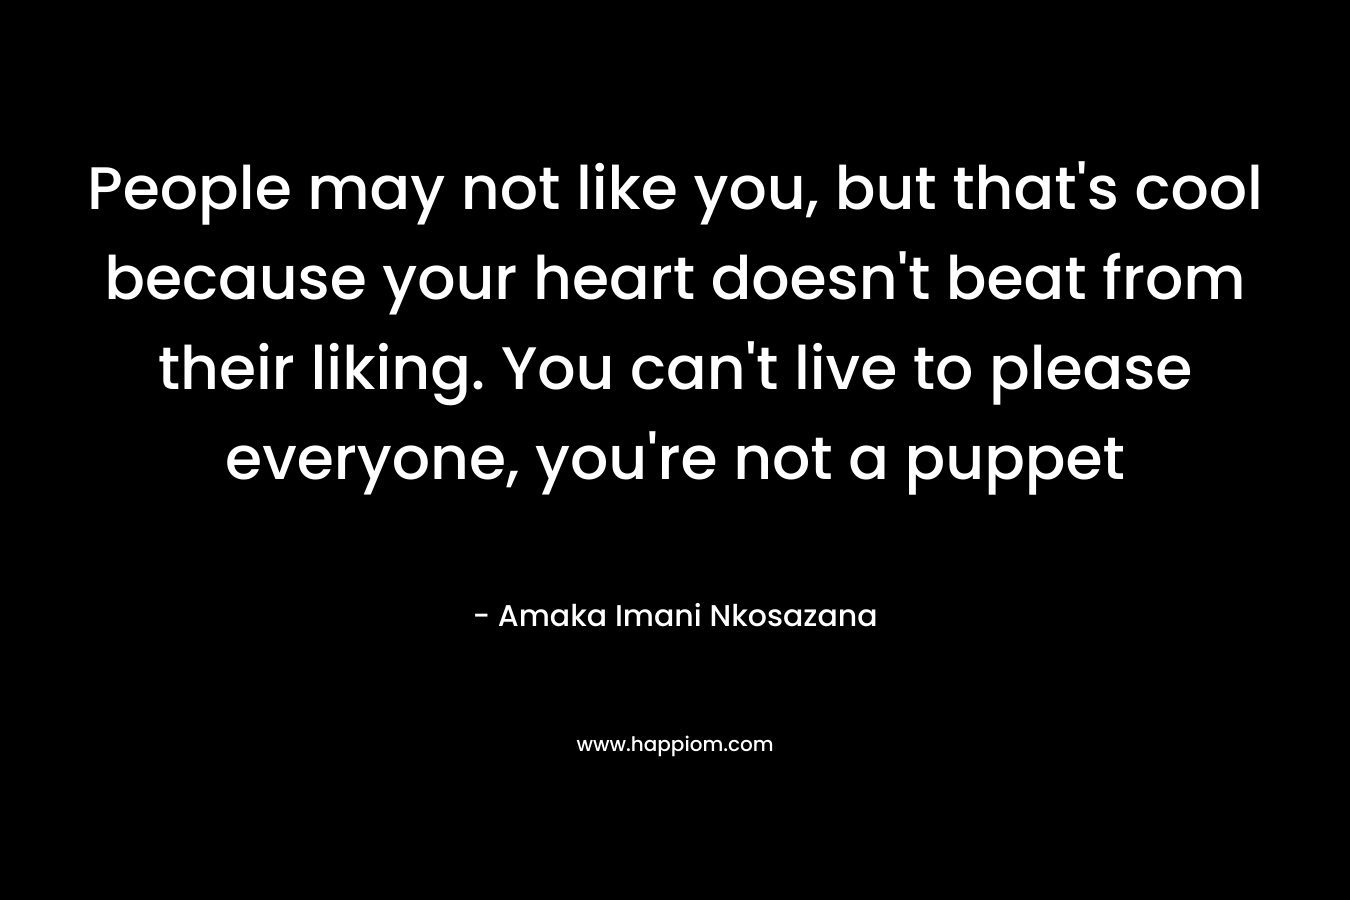 People may not like you, but that's cool because your heart doesn't beat from their liking. You can't live to please everyone, you're not a puppet